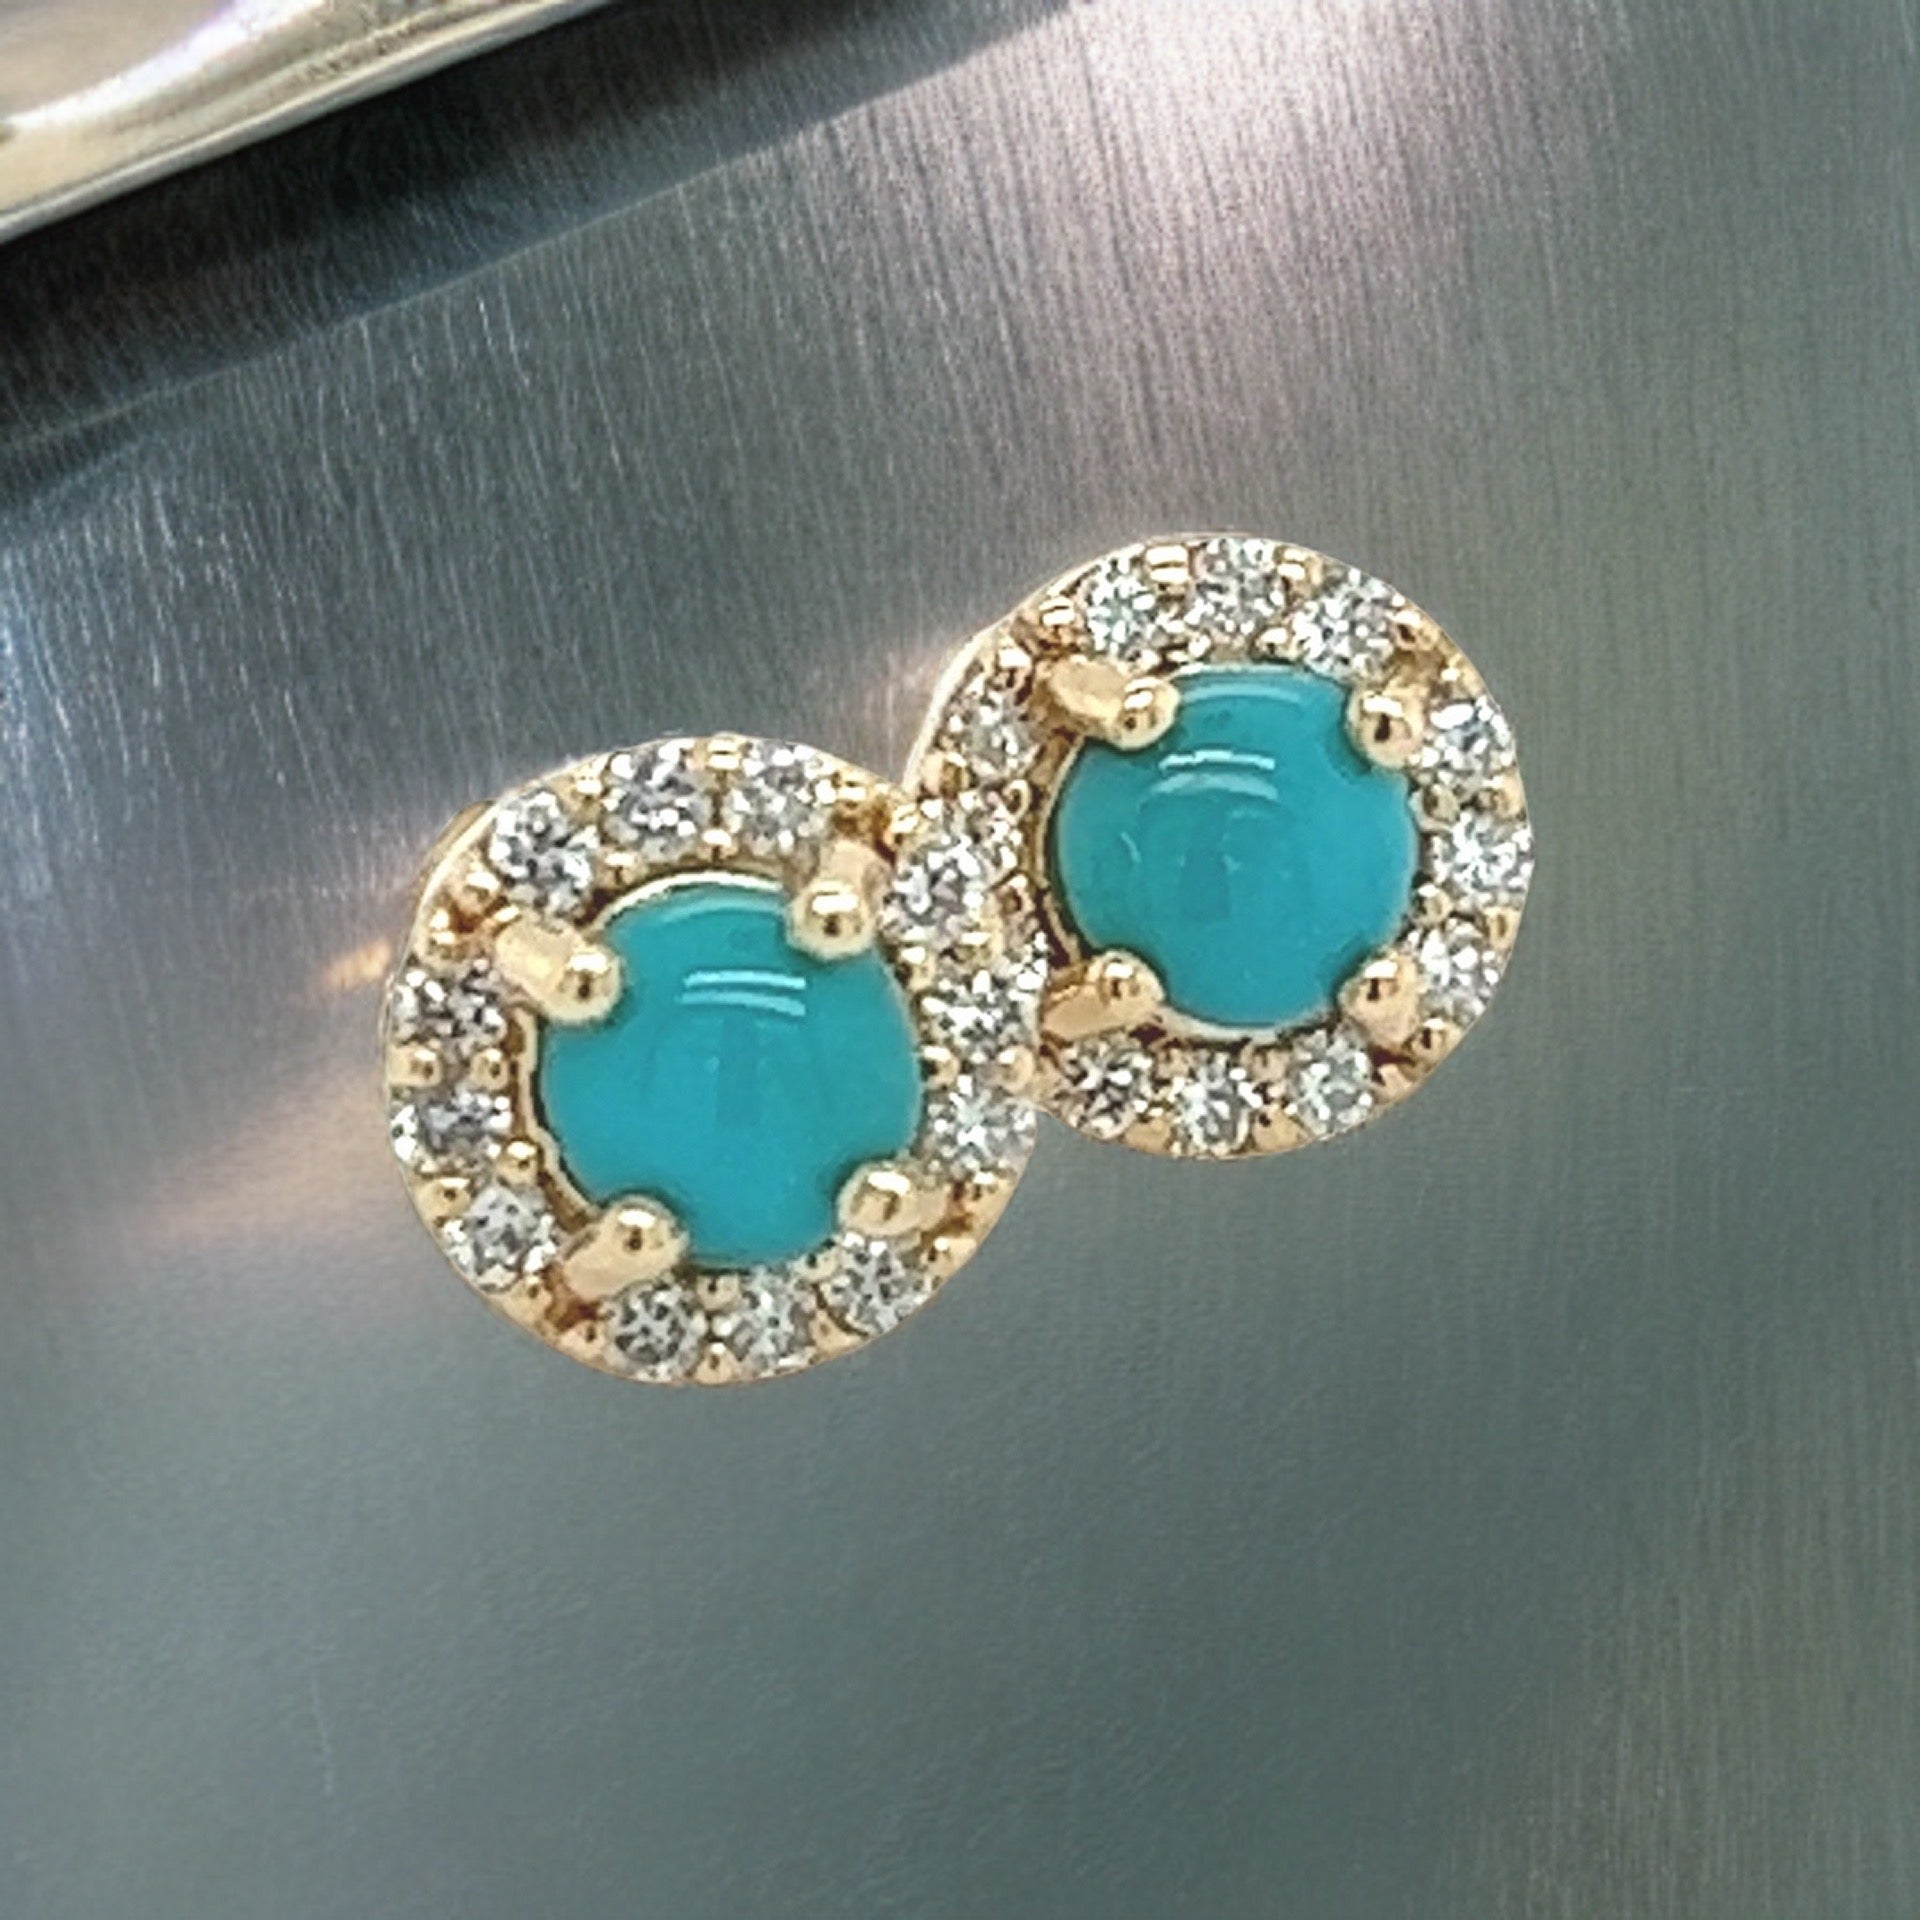 Natural Turquoise Diamond Stud Earrings 14k Yellow Gold 0.65 TCW Certified $1,590 217840 - Certified Fine Jewelry